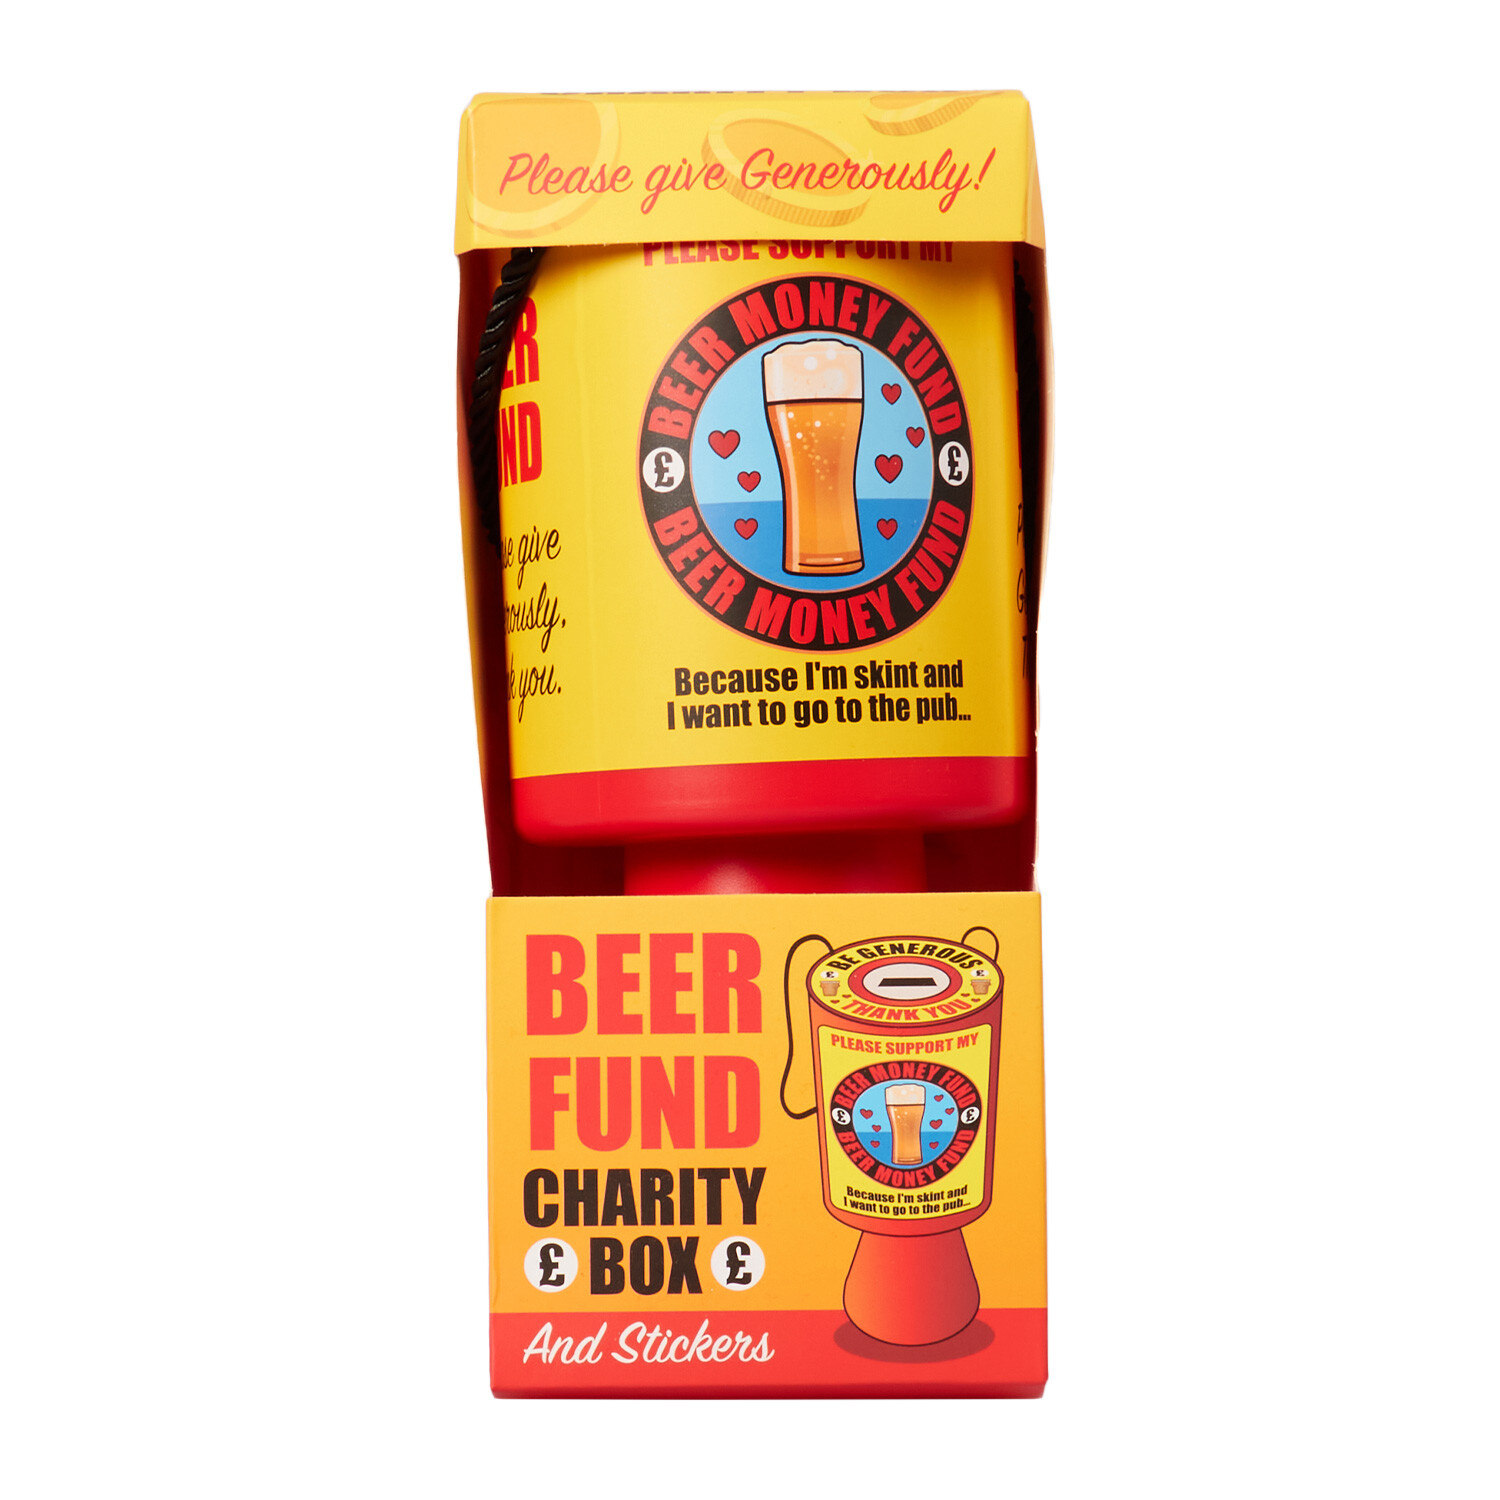 G&G Beer Fund Charity Box Image 5